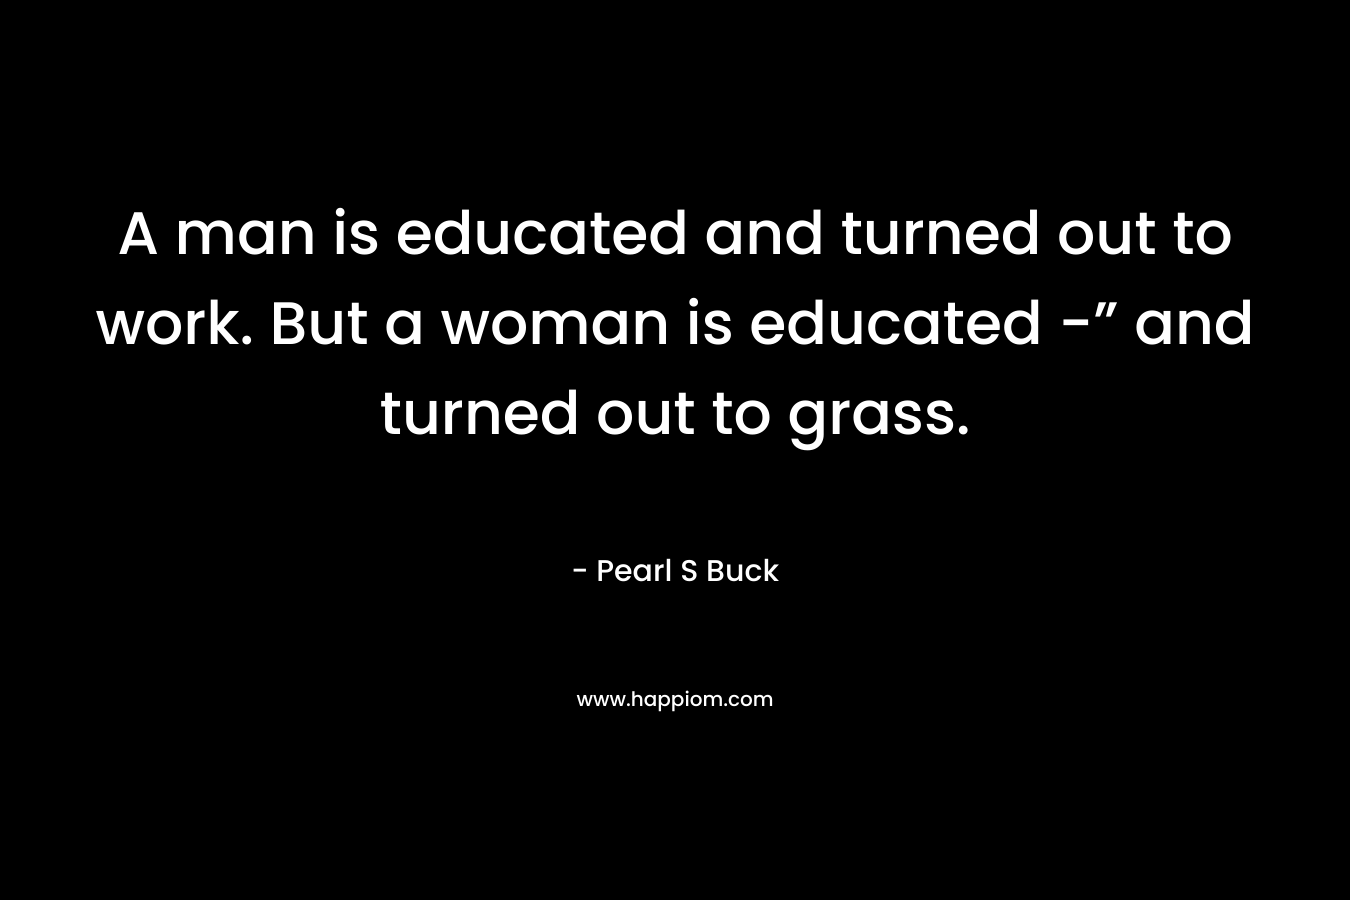 A man is educated and turned out to work. But a woman is educated -” and turned out to grass.